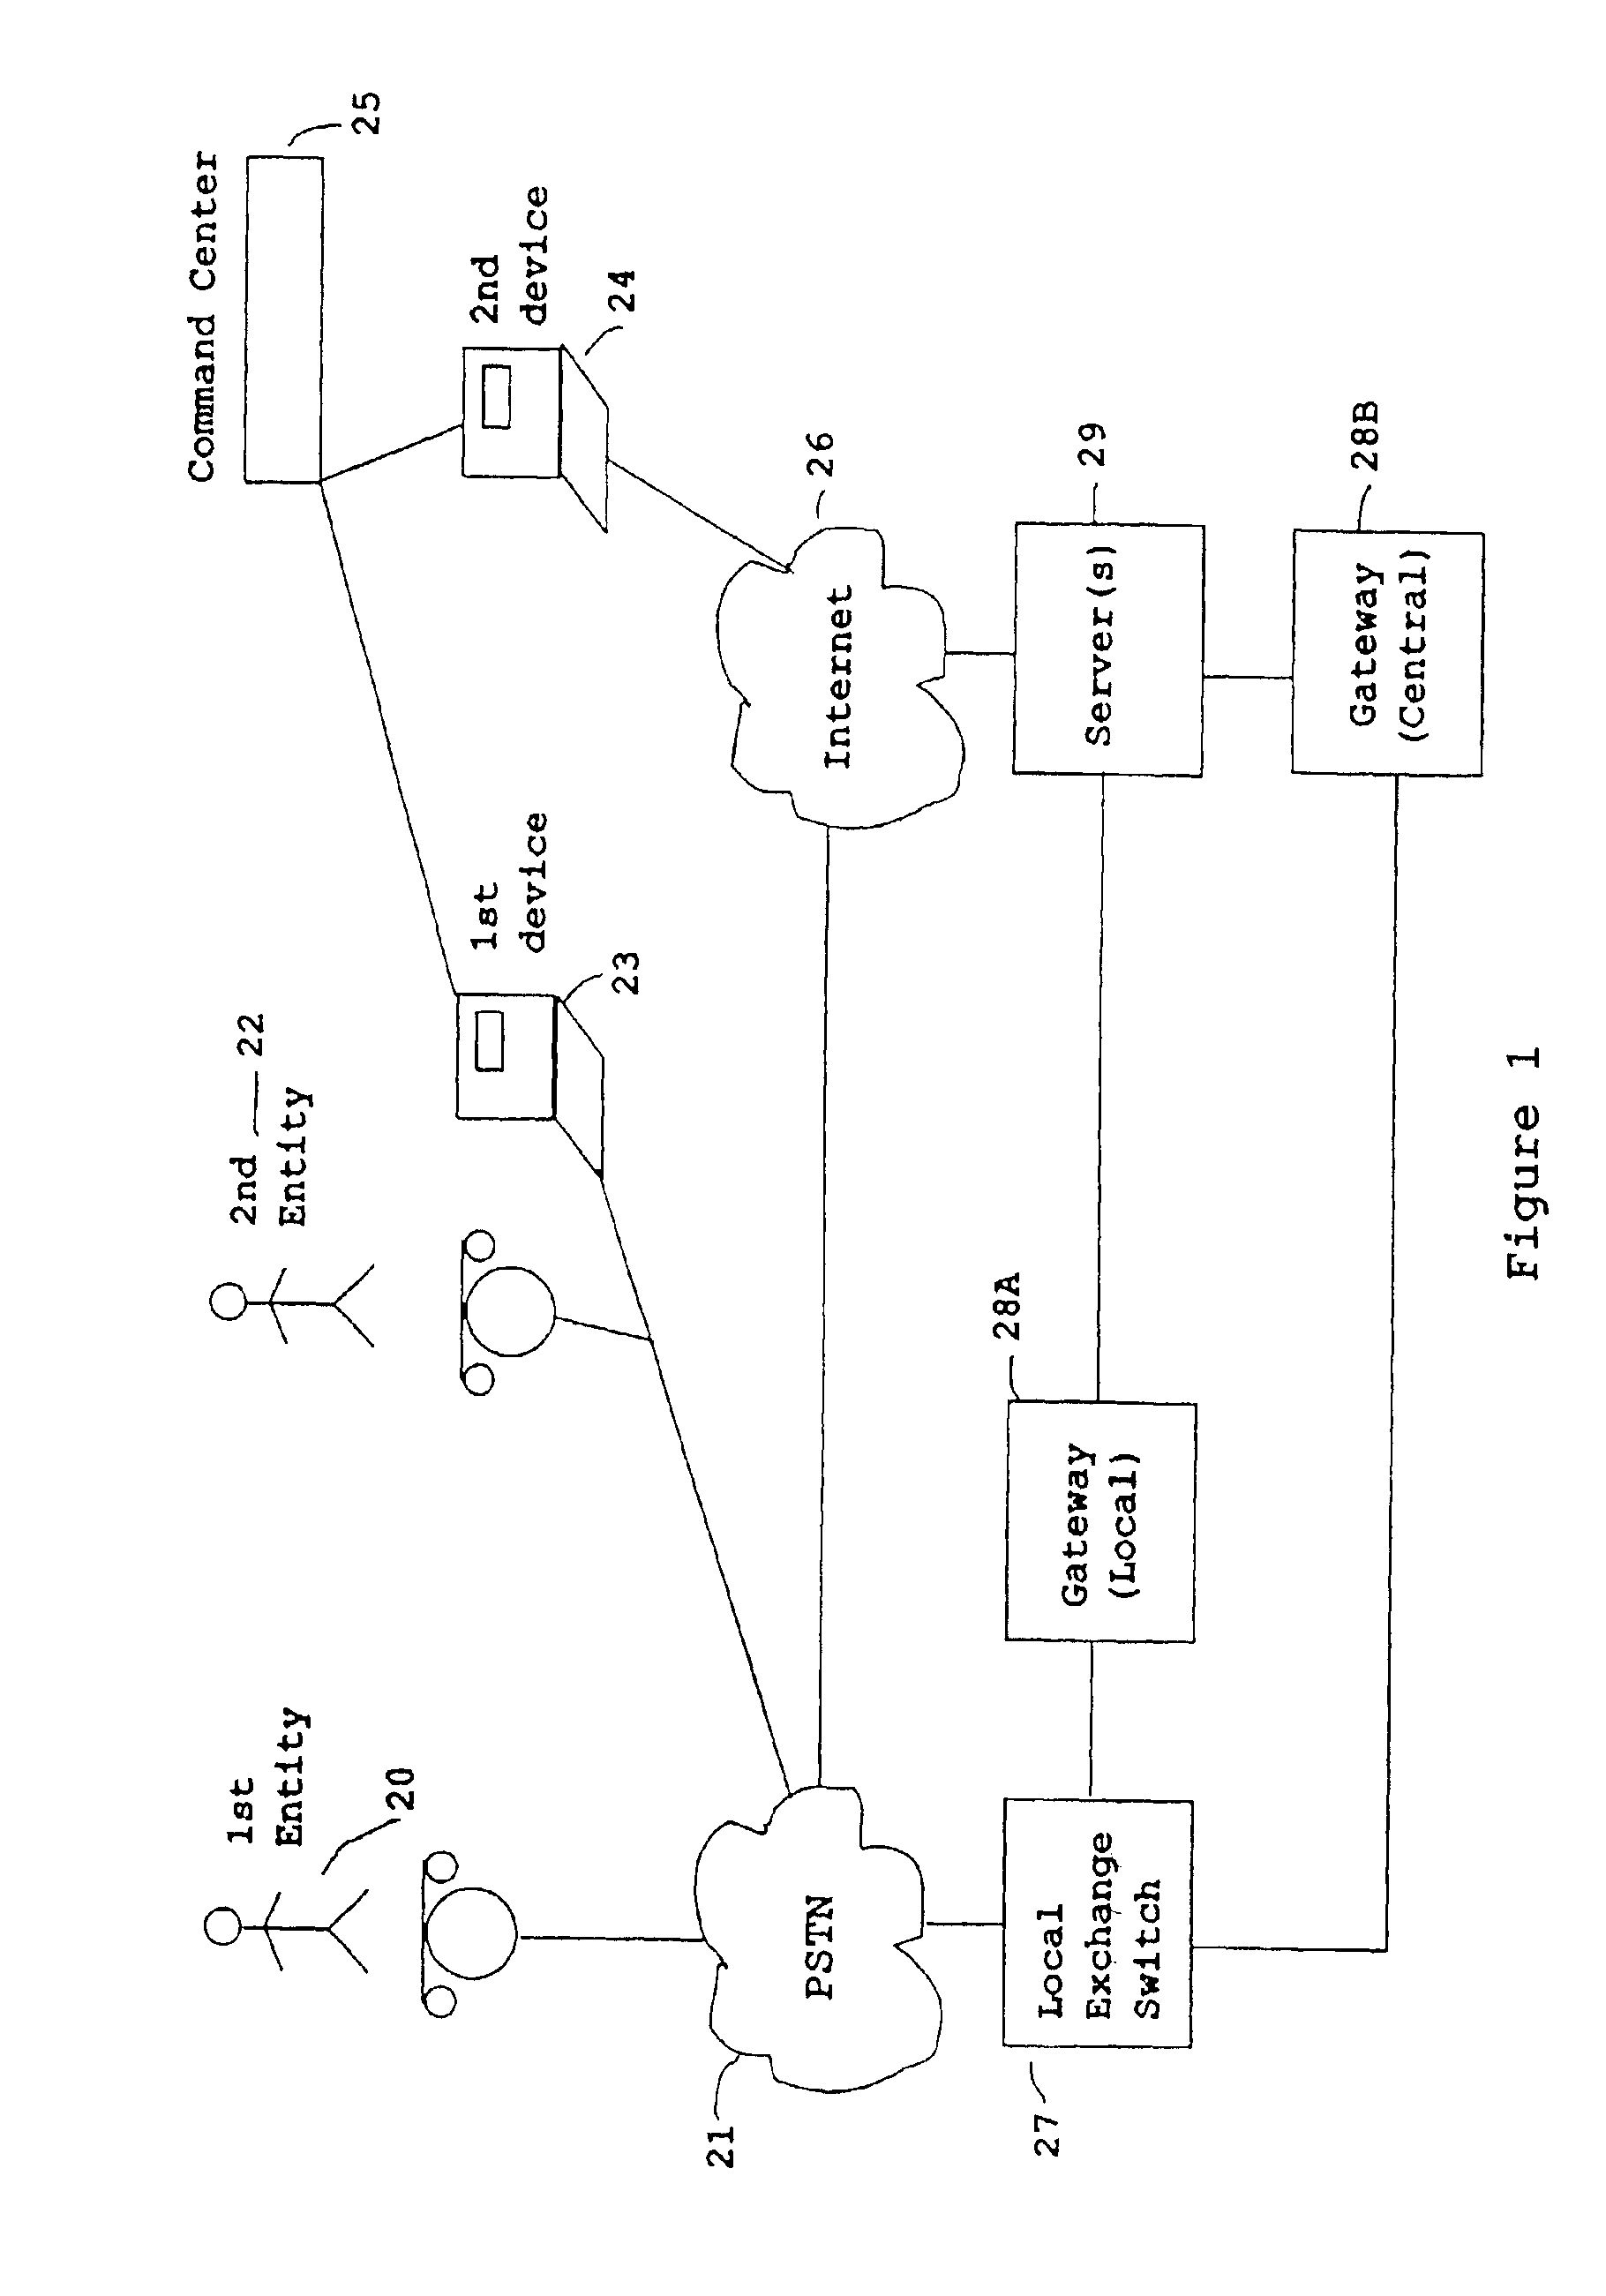 Method and apparatus for providing expanded telecommunications service